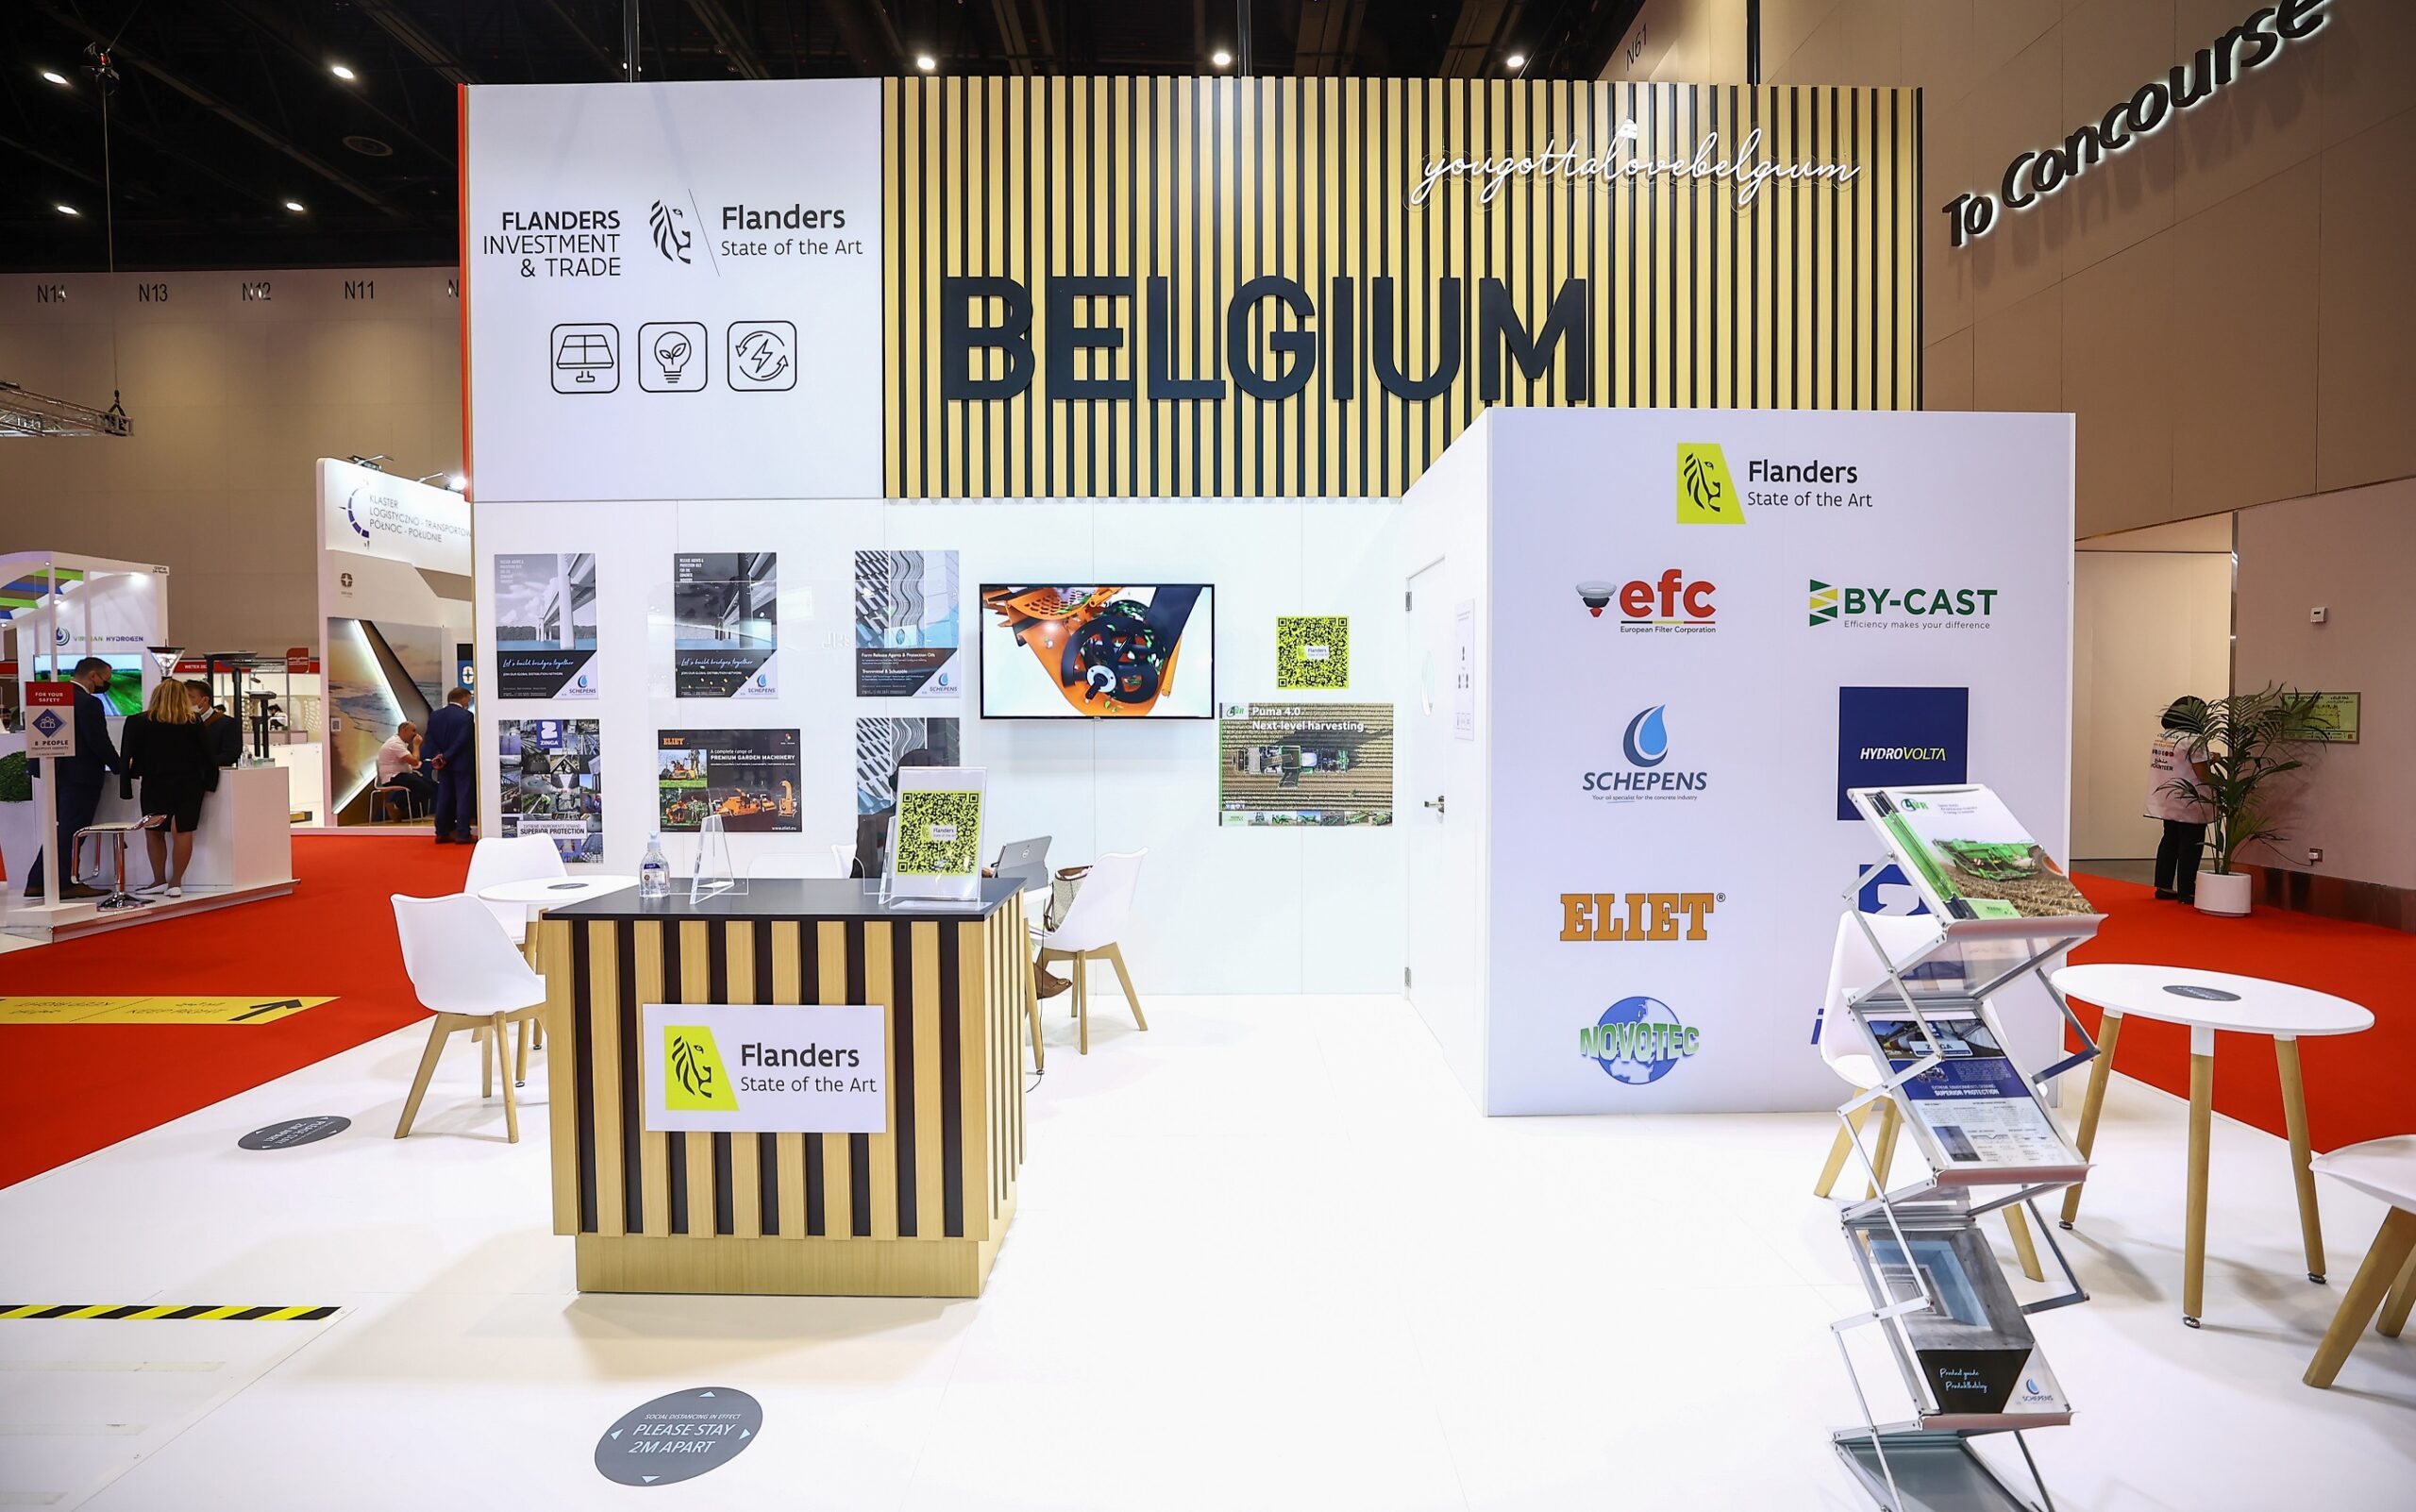 Belgian companies showcase their latest technologies in energy and water during their participation in WETEX